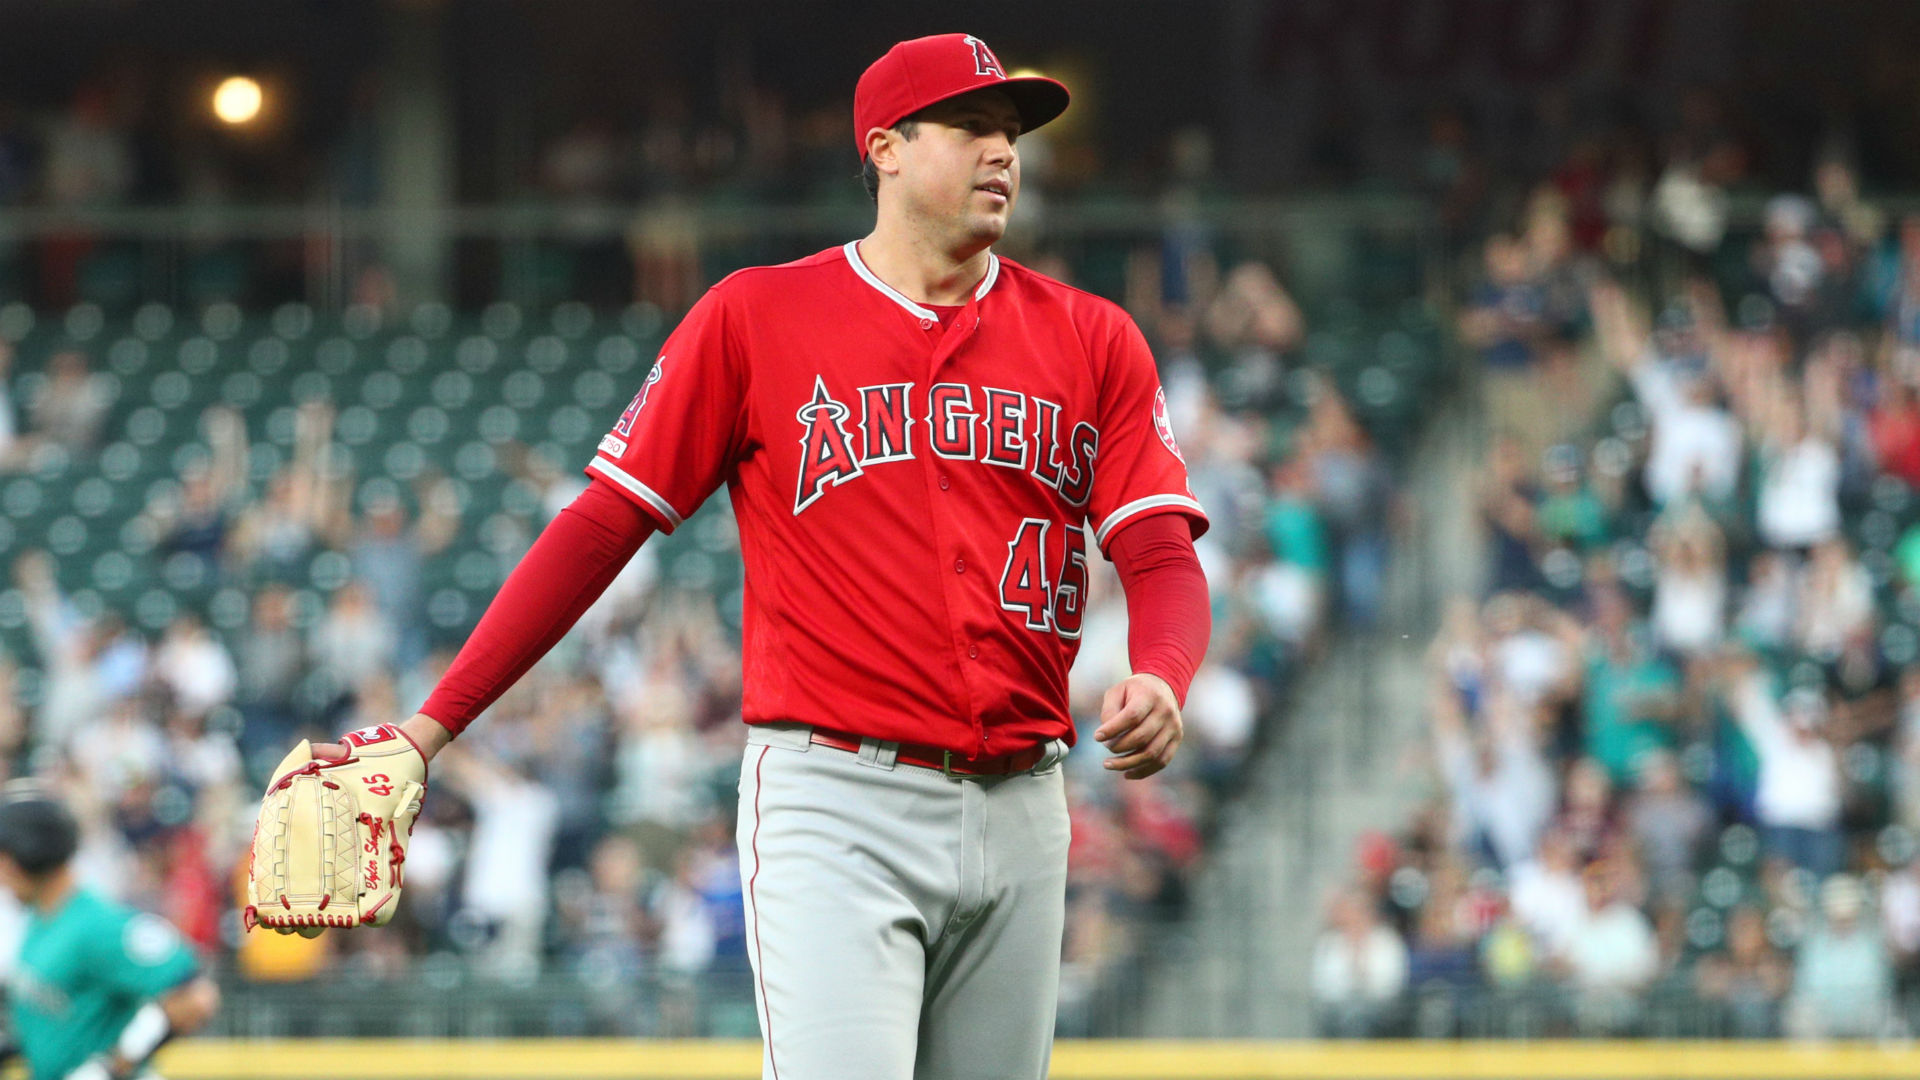 Skaggs was found dead in July at the team's hotel in Texas. The cause of death was a mixture of "alcohol, fentanyl and oxycodone."